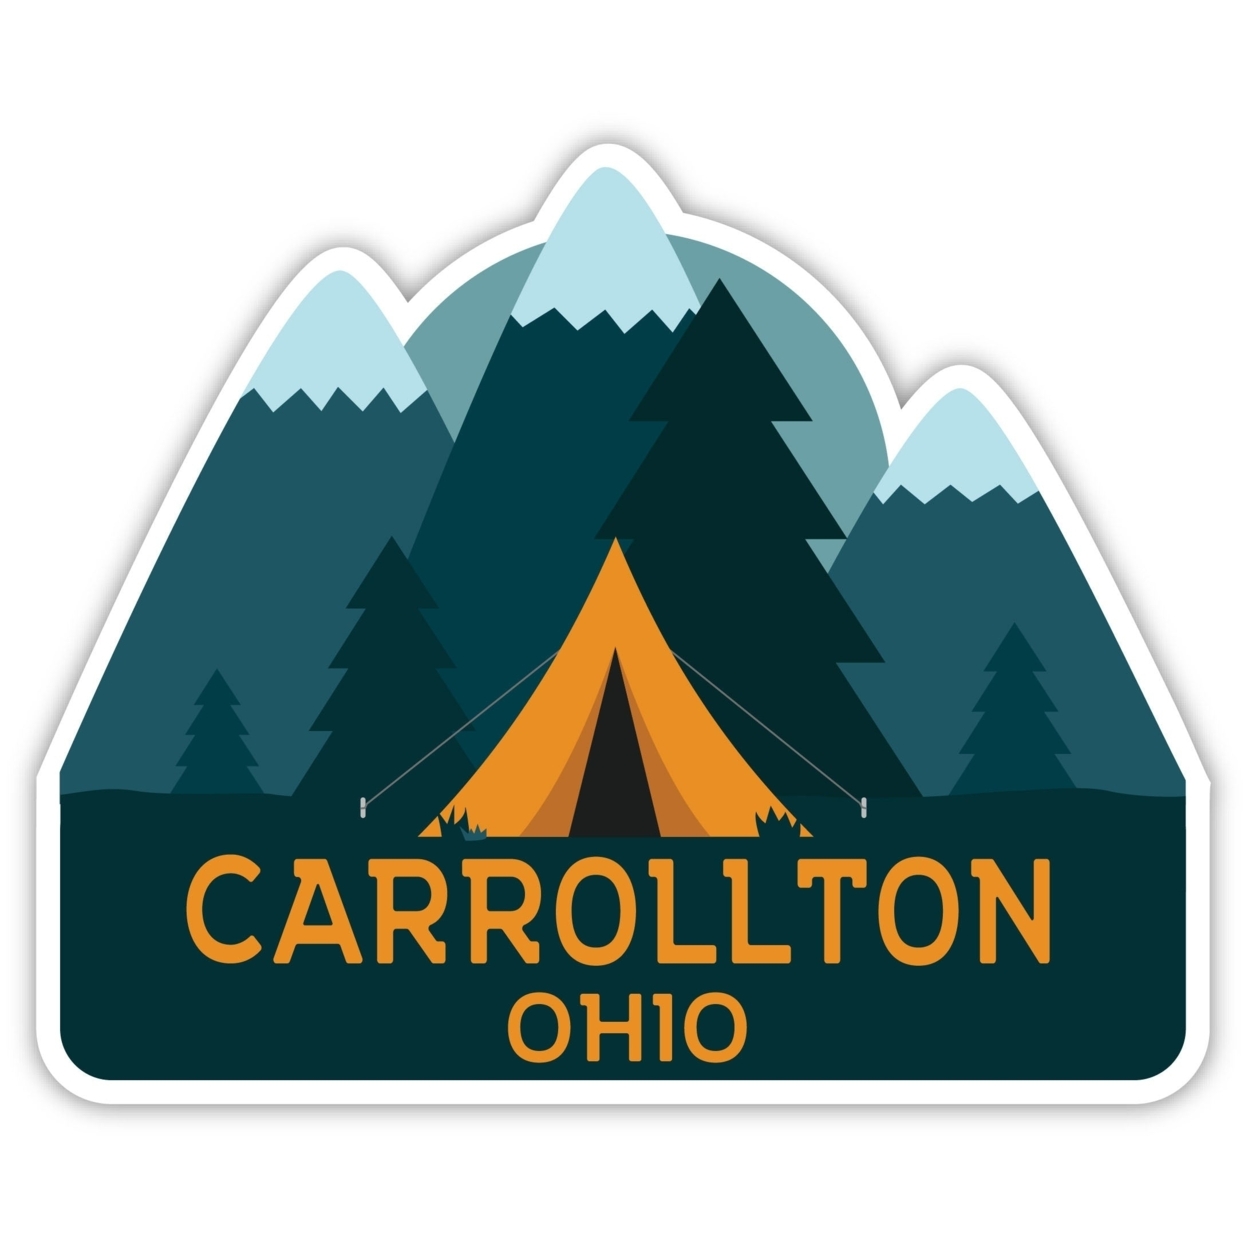 Carrollton Ohio Souvenir Decorative Stickers (Choose Theme And Size) - 4-Pack, 4-Inch, Tent